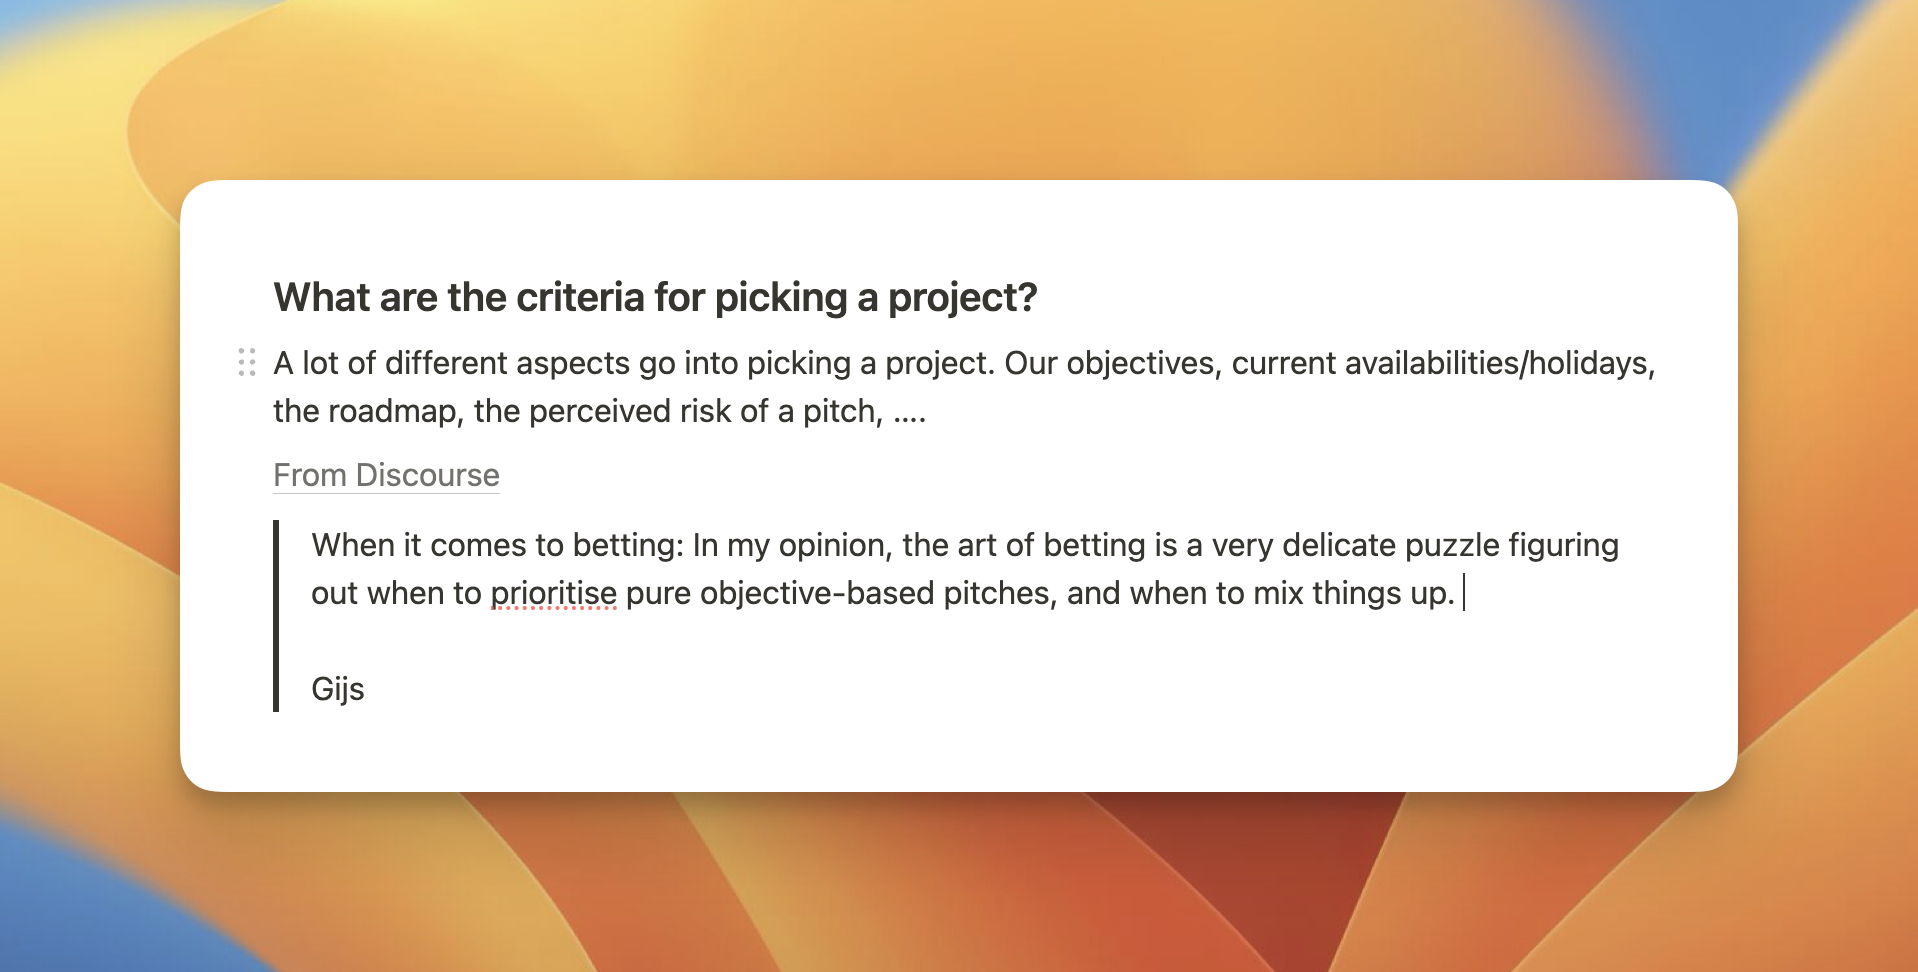 Criteria for picking a project